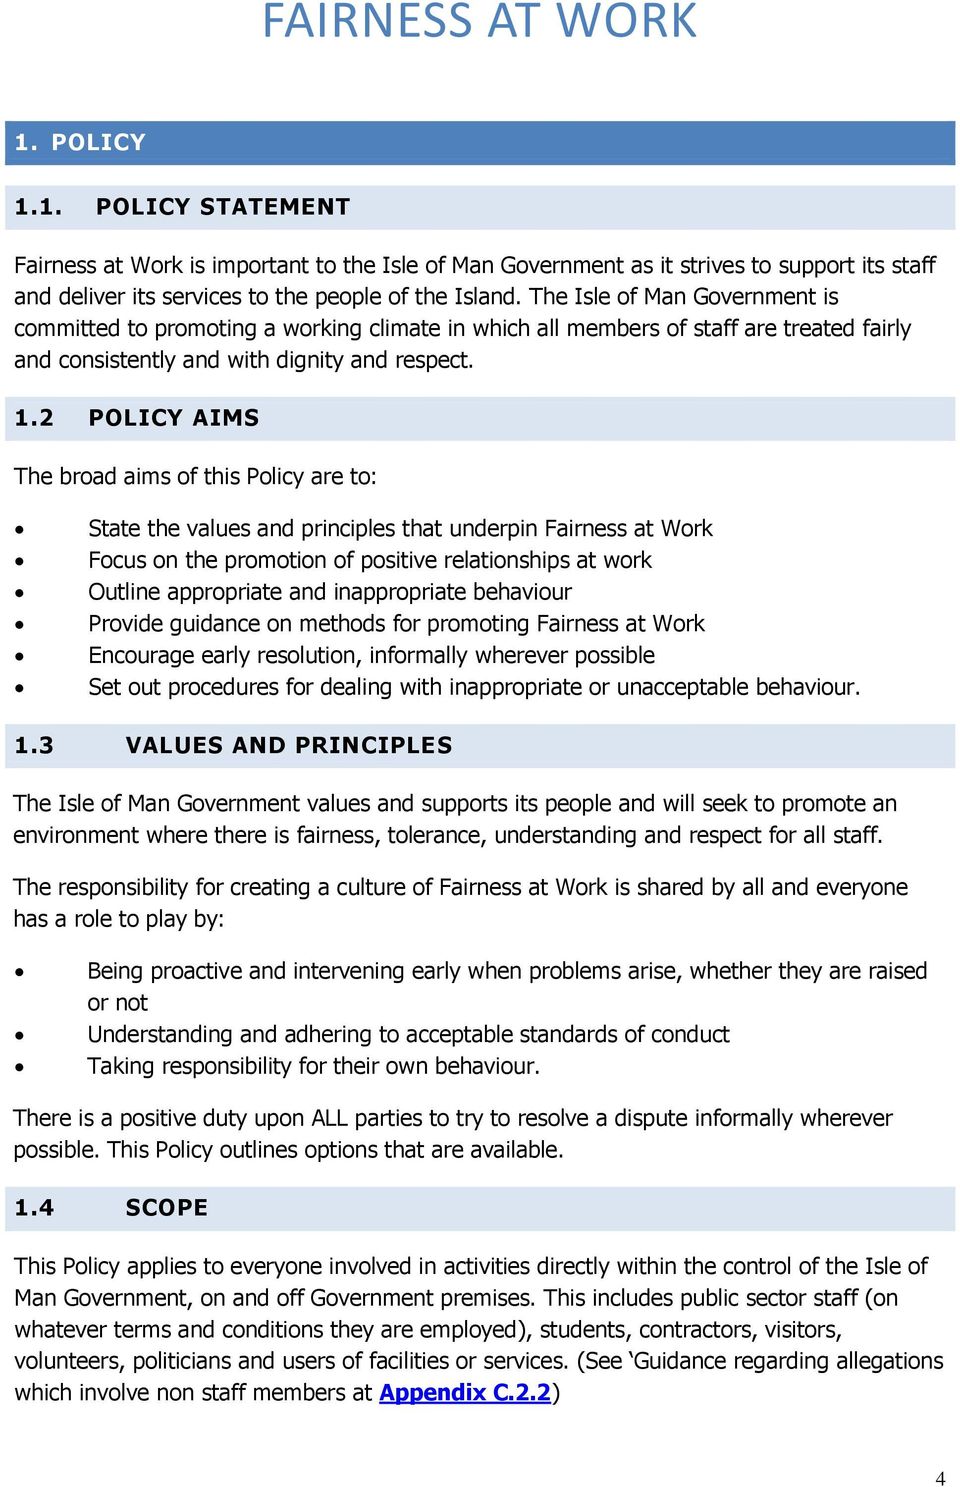 2 POLICY AIMS The broad aims of this Policy are to: State the values and principles that underpin Fairness at Work Focus on the promotion of positive relationships at work Outline appropriate and